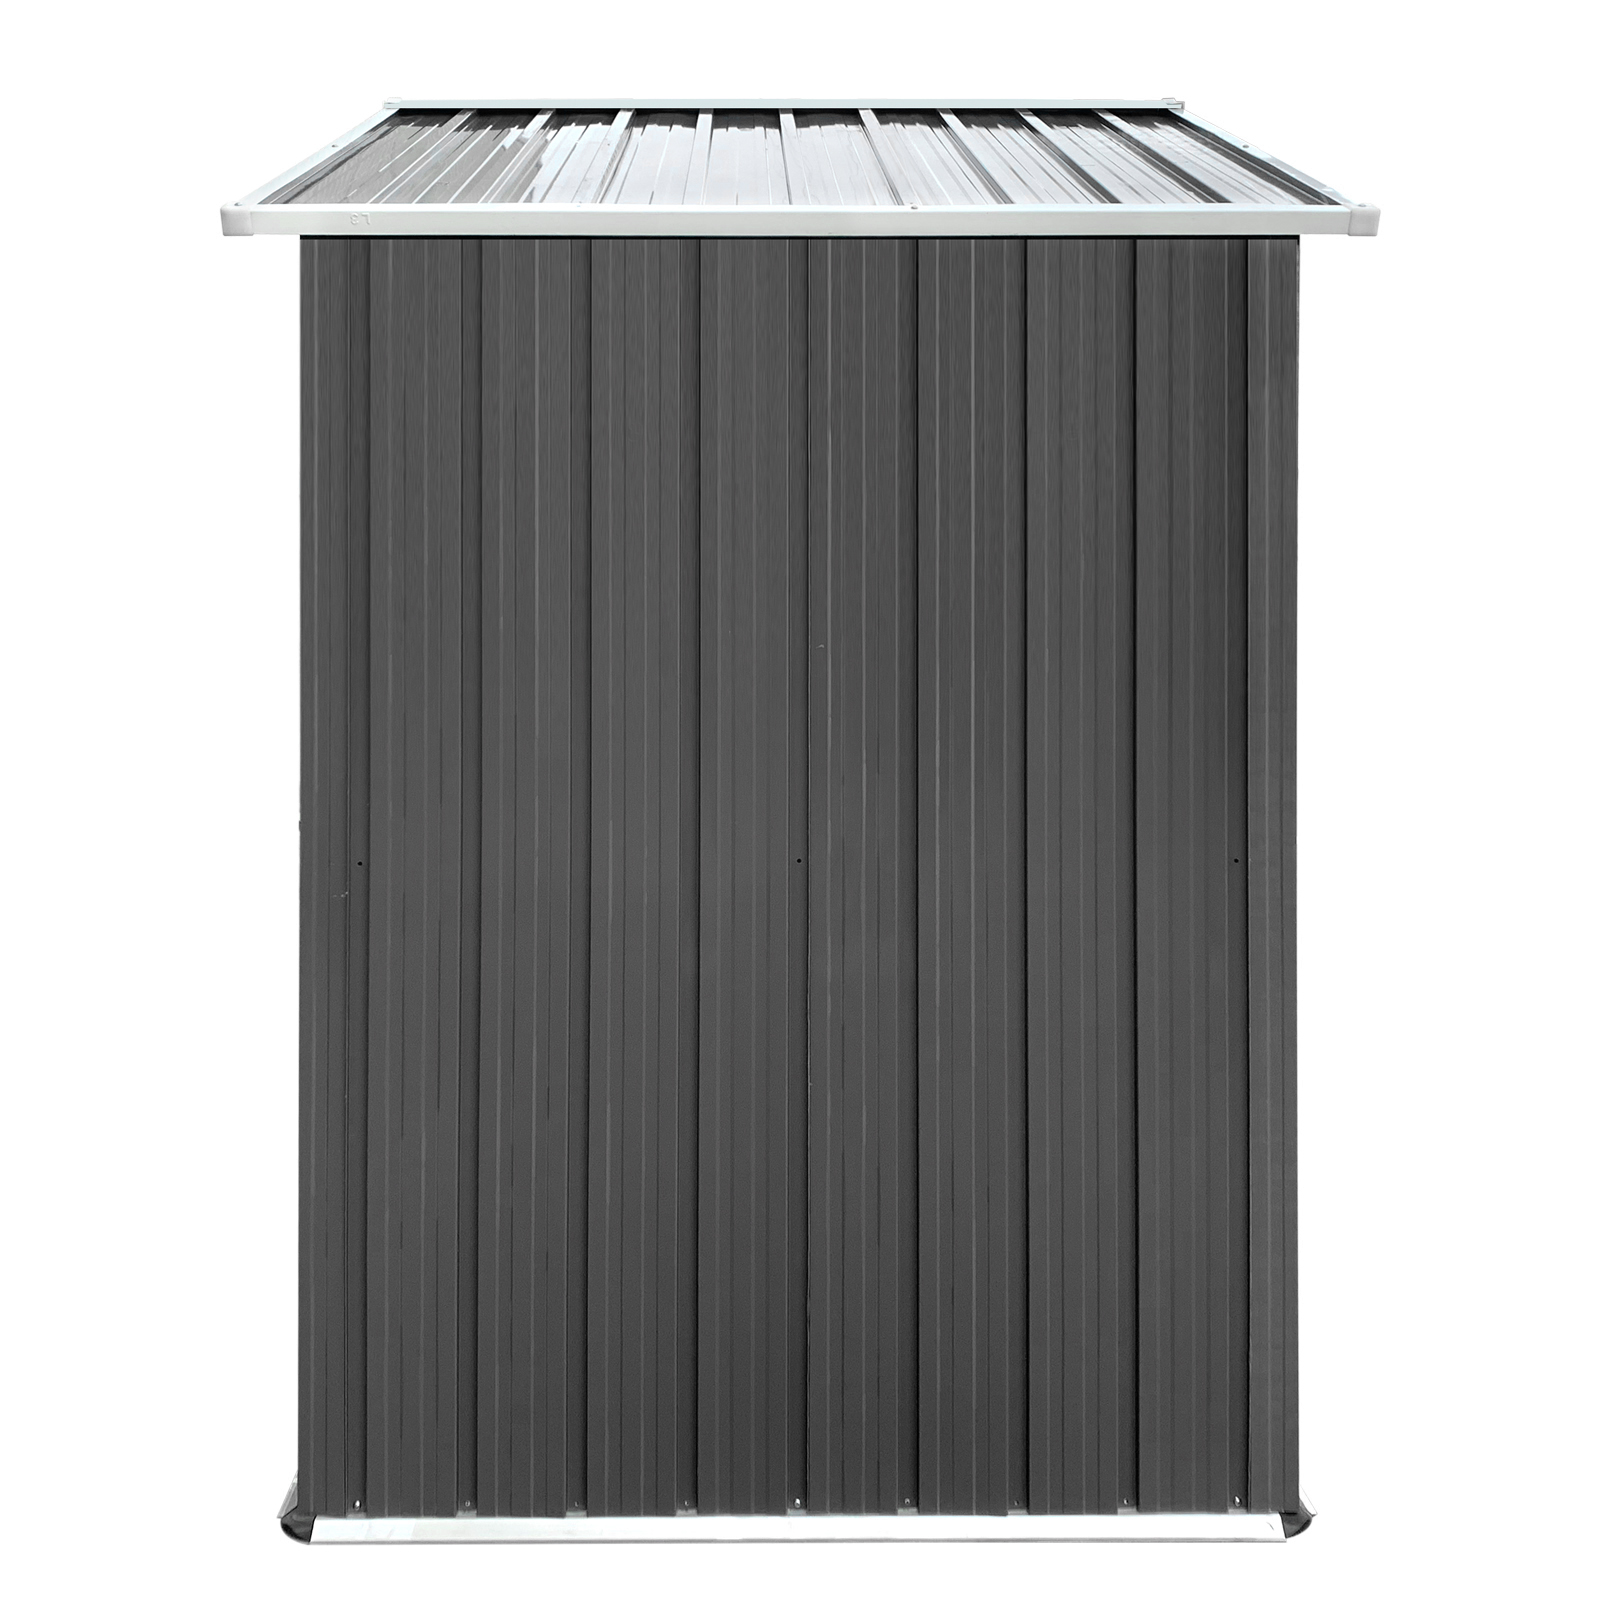 6' x 4' Outdoor Metal Storage Shed, Tools Storage Shed, Galvanized Steel Garden Shed with Lockable Doors, Outdoor Storage Shed for Backyard, Patio, Lawn, D8311 - image 5 of 9